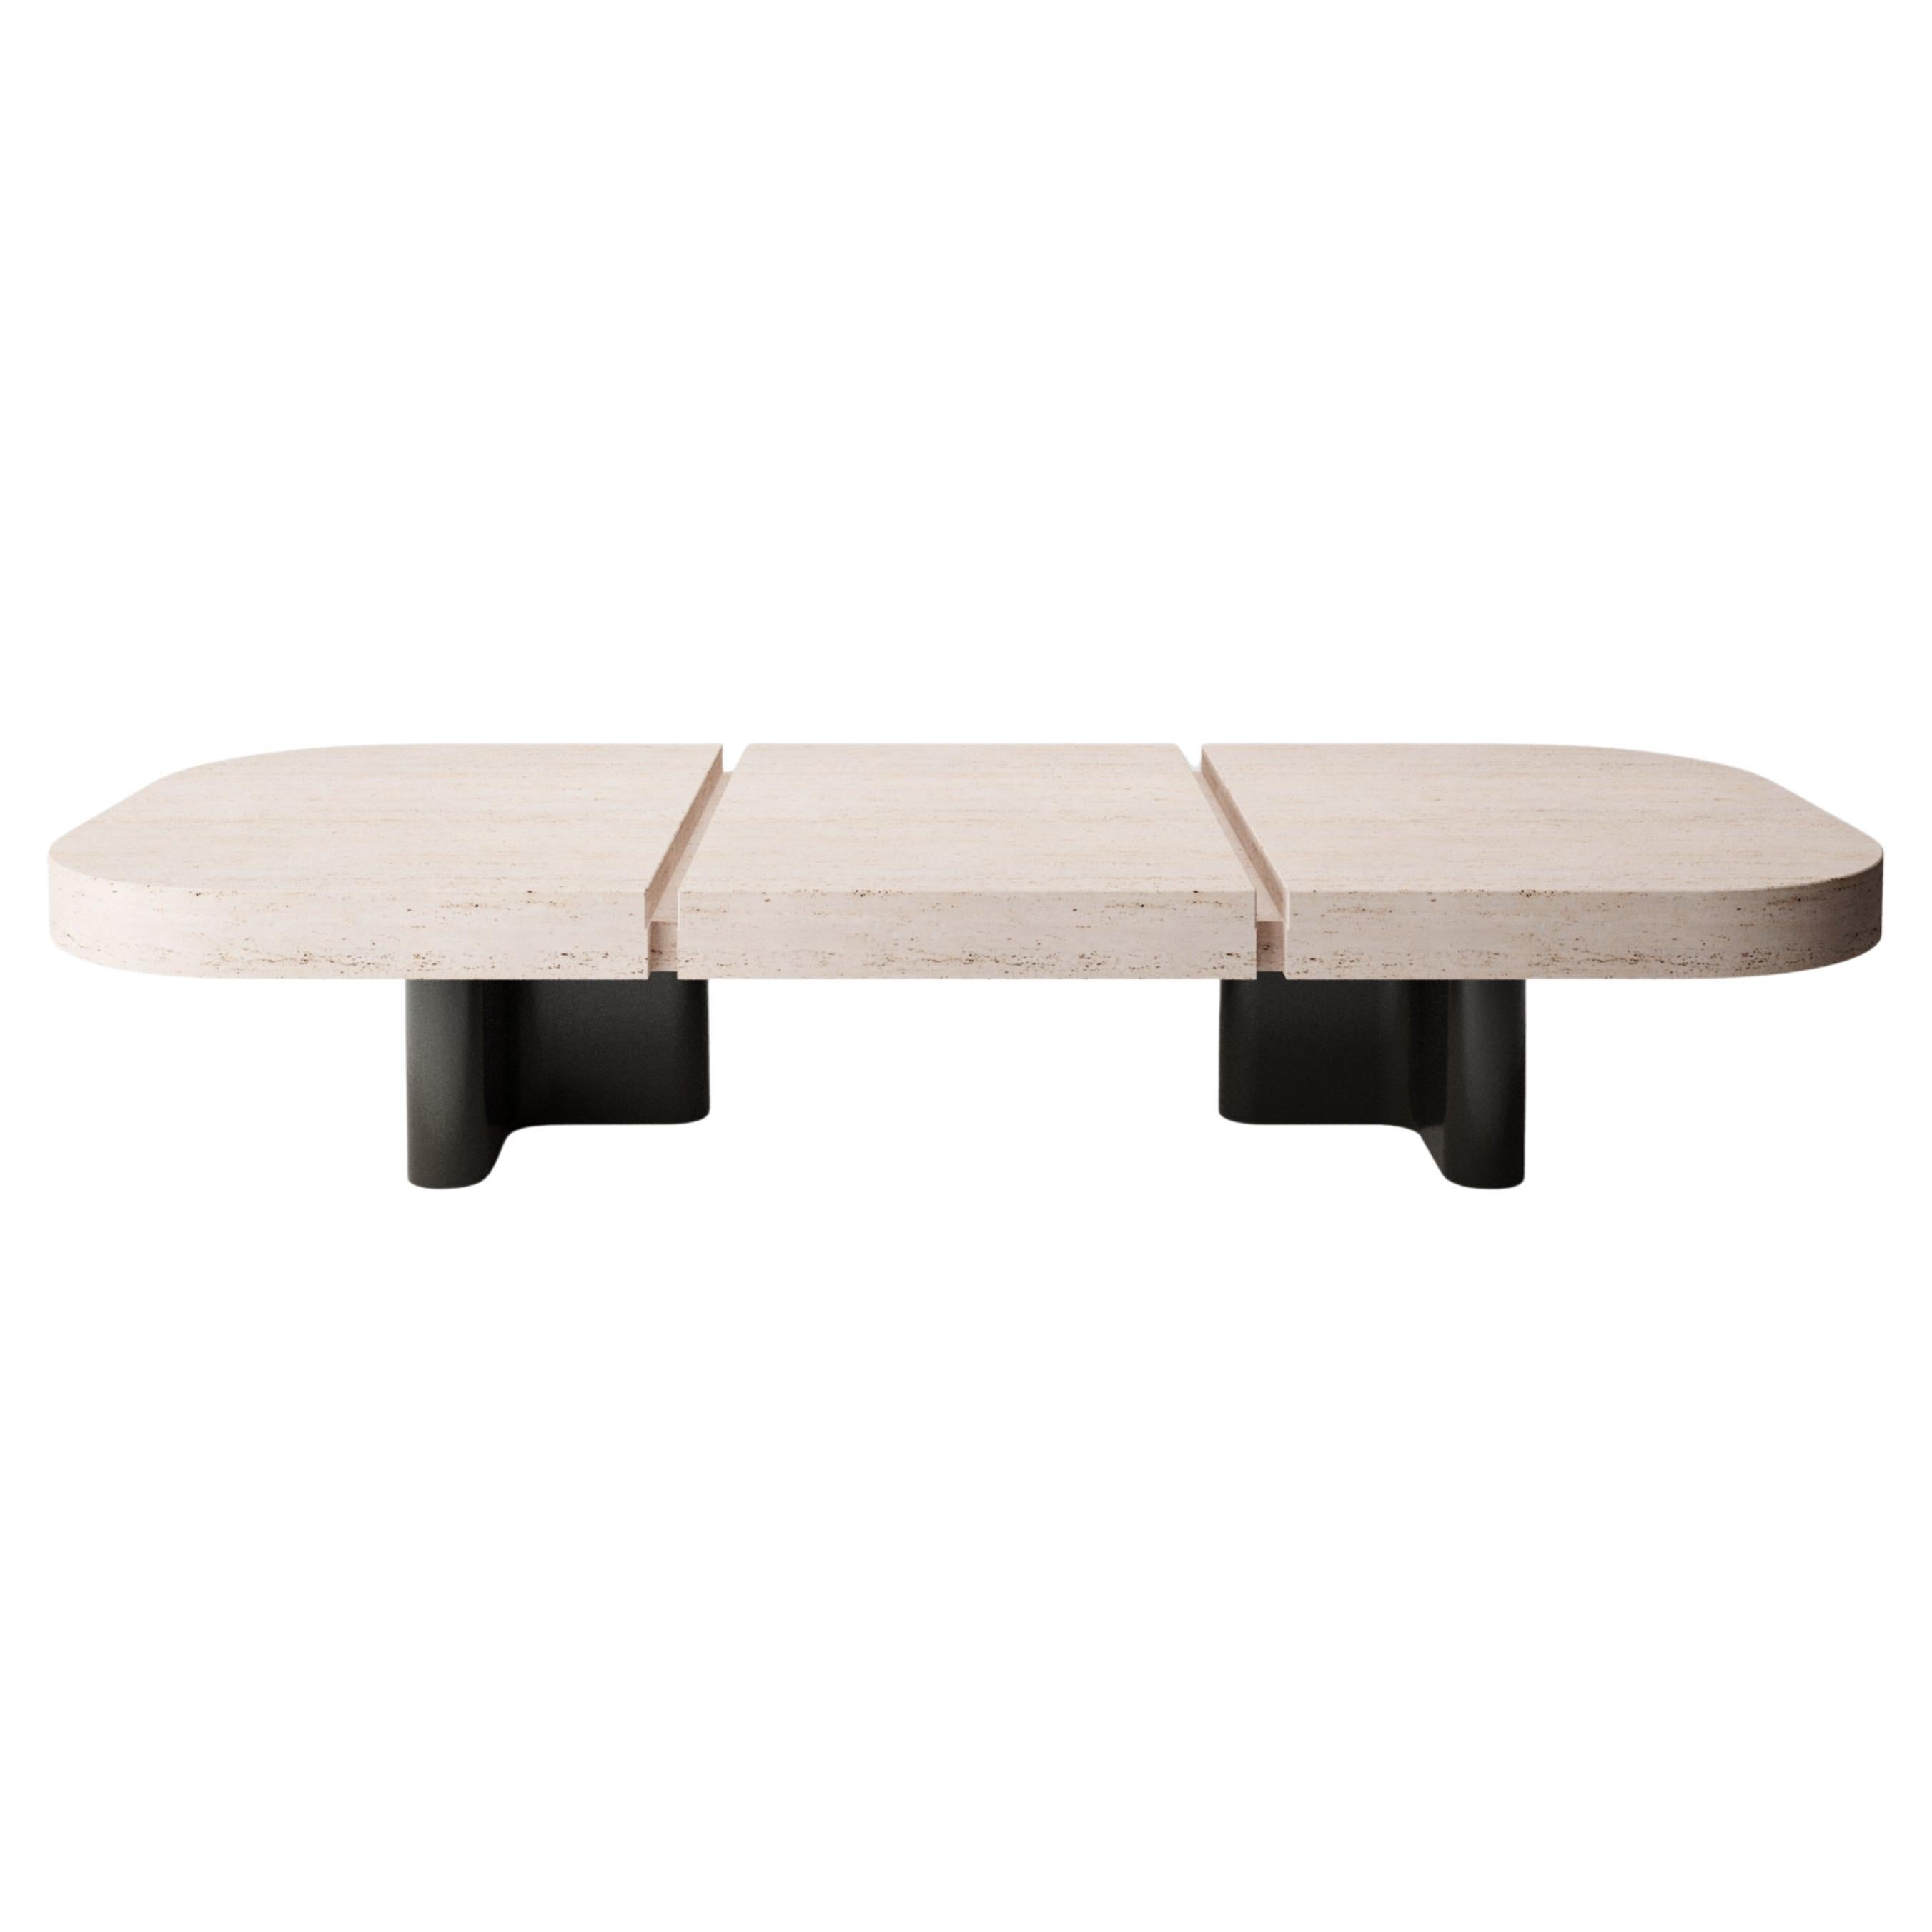 Collector -Designed by Studio Rig Meco Table centrale laquée et Travertino